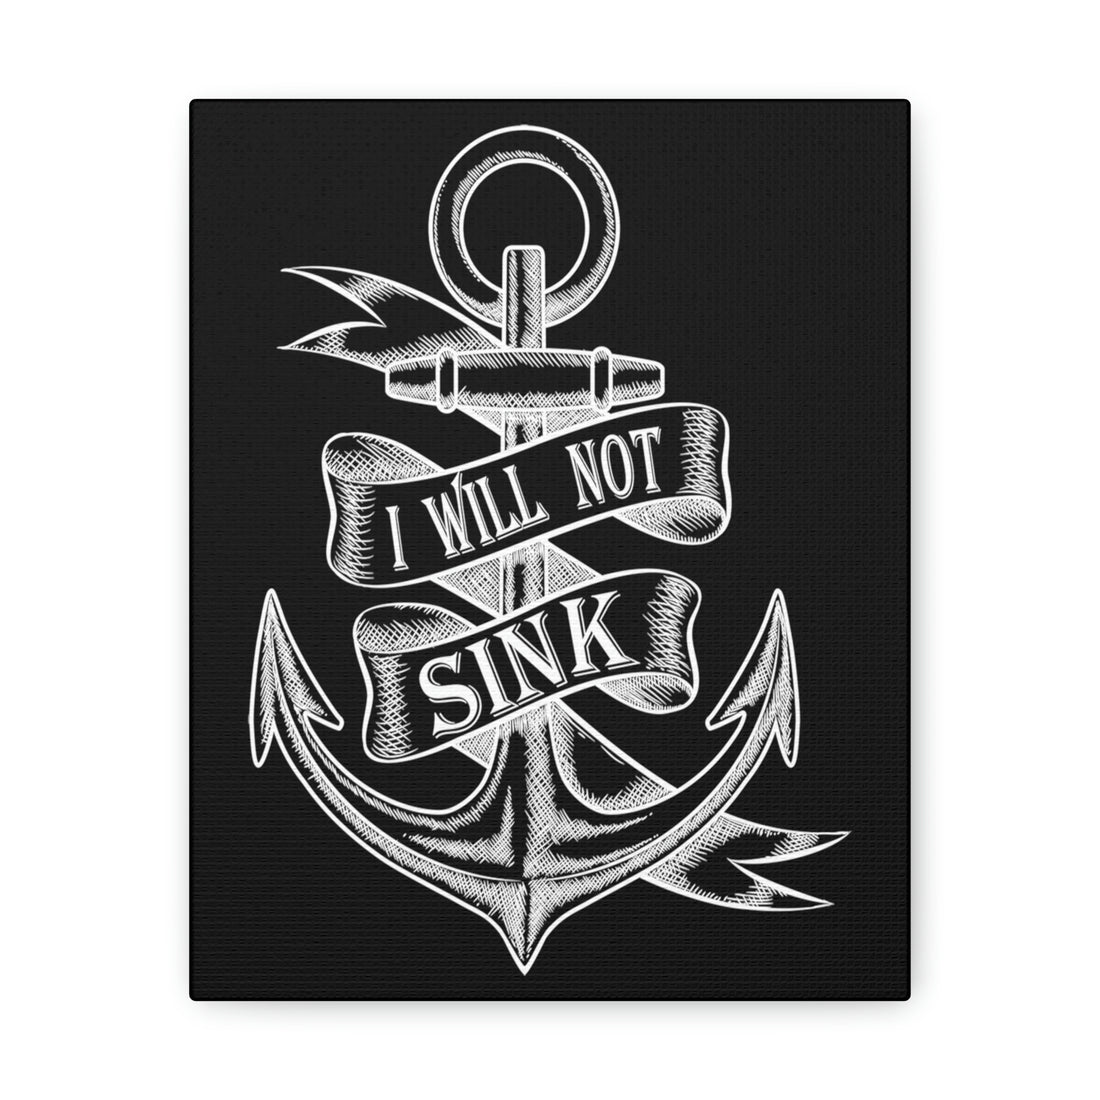 I Will Not Sink - Canvas Print